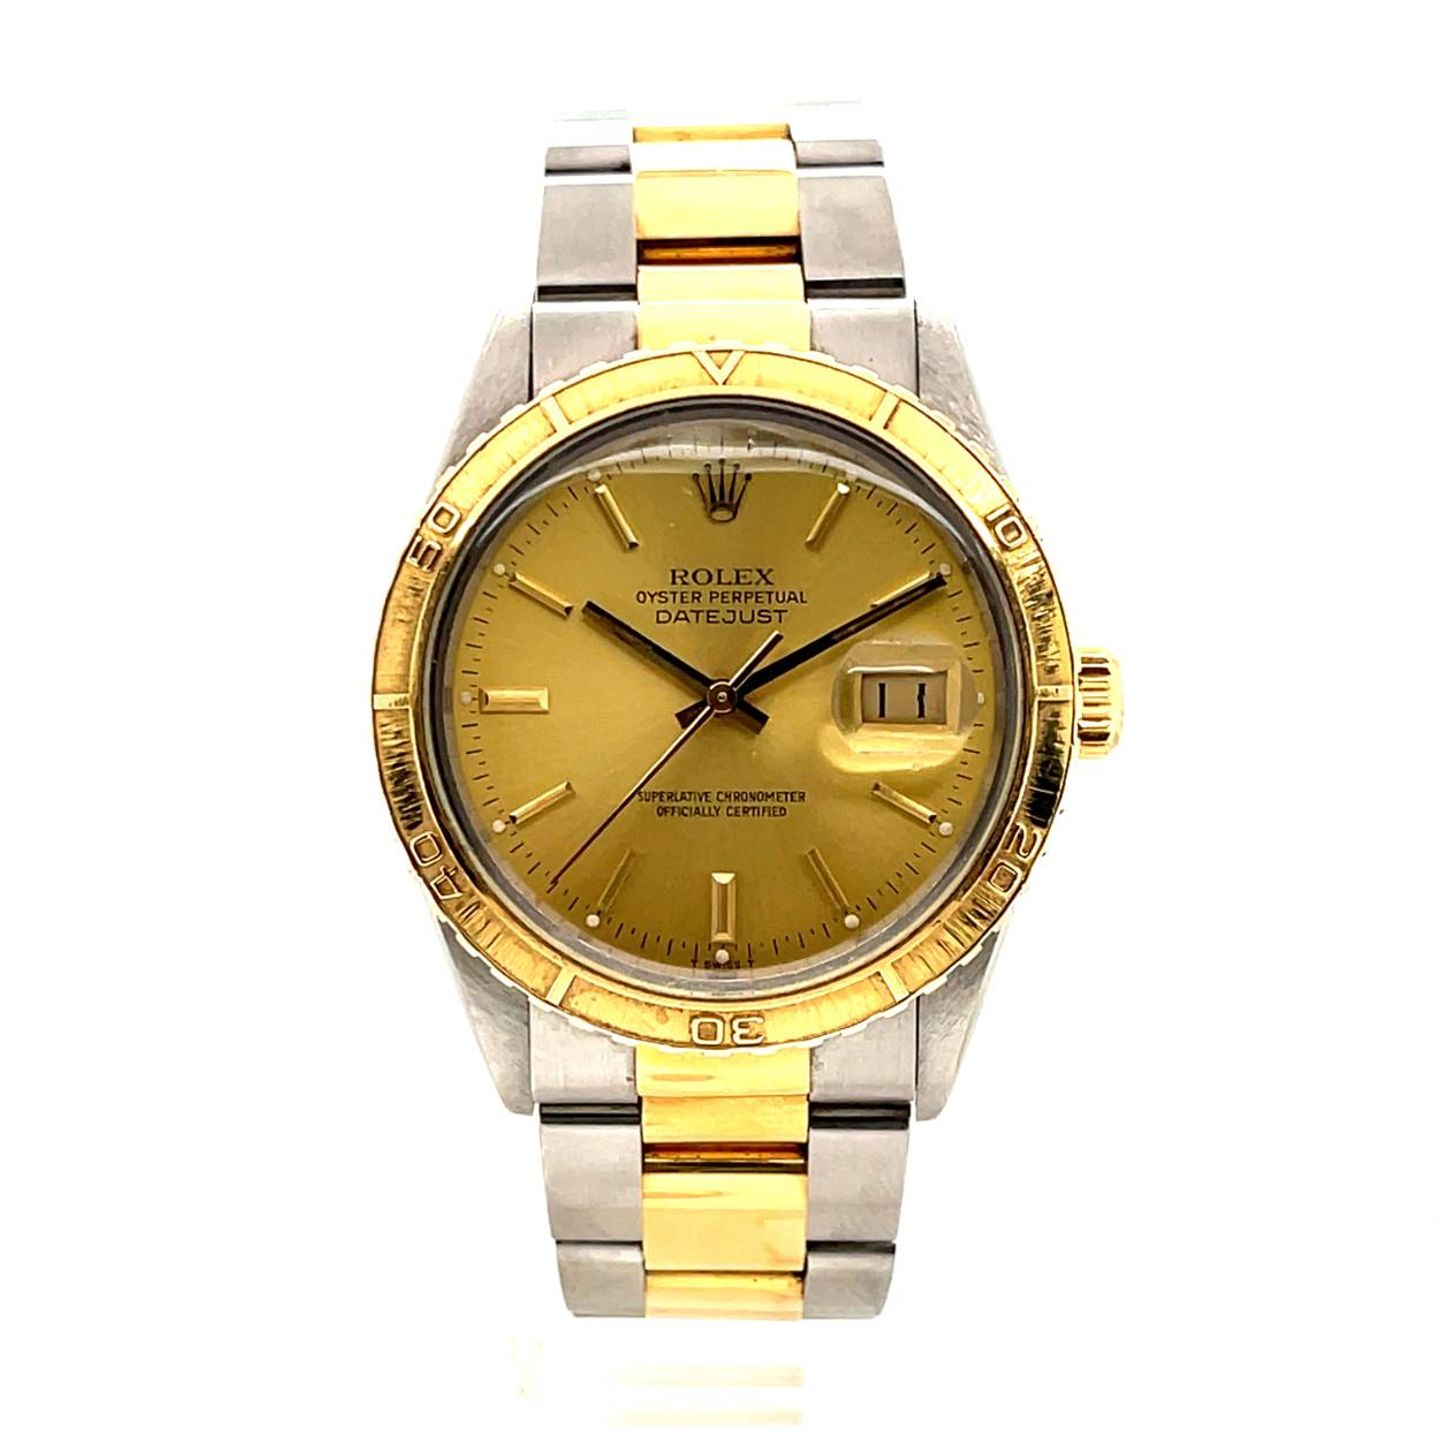 Rolex Datejust Turn-O-Graph 16253 (1979) - Champagne dial 36 mm Gold/Steel case (1/5)